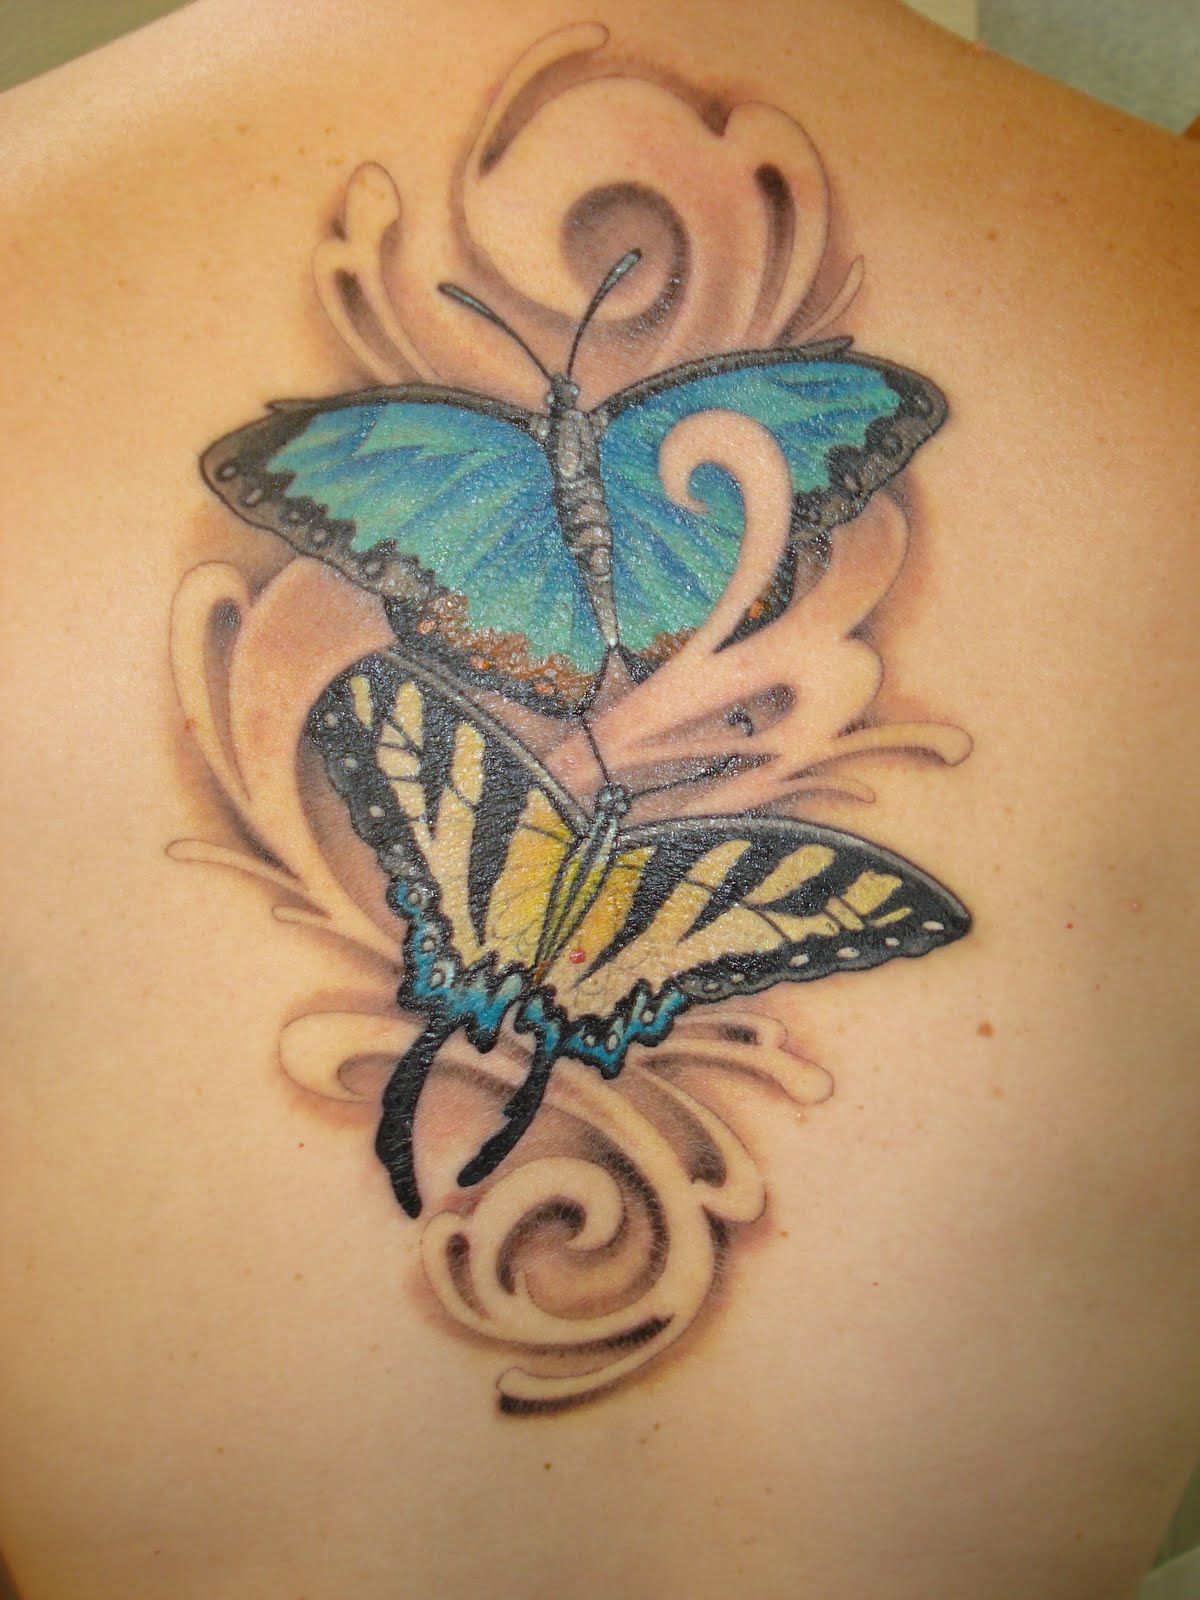 Butterfly Vine Tattoo Designs Butterfly Vine Tattoo Designs with regard to dimensions 1200 X 1600